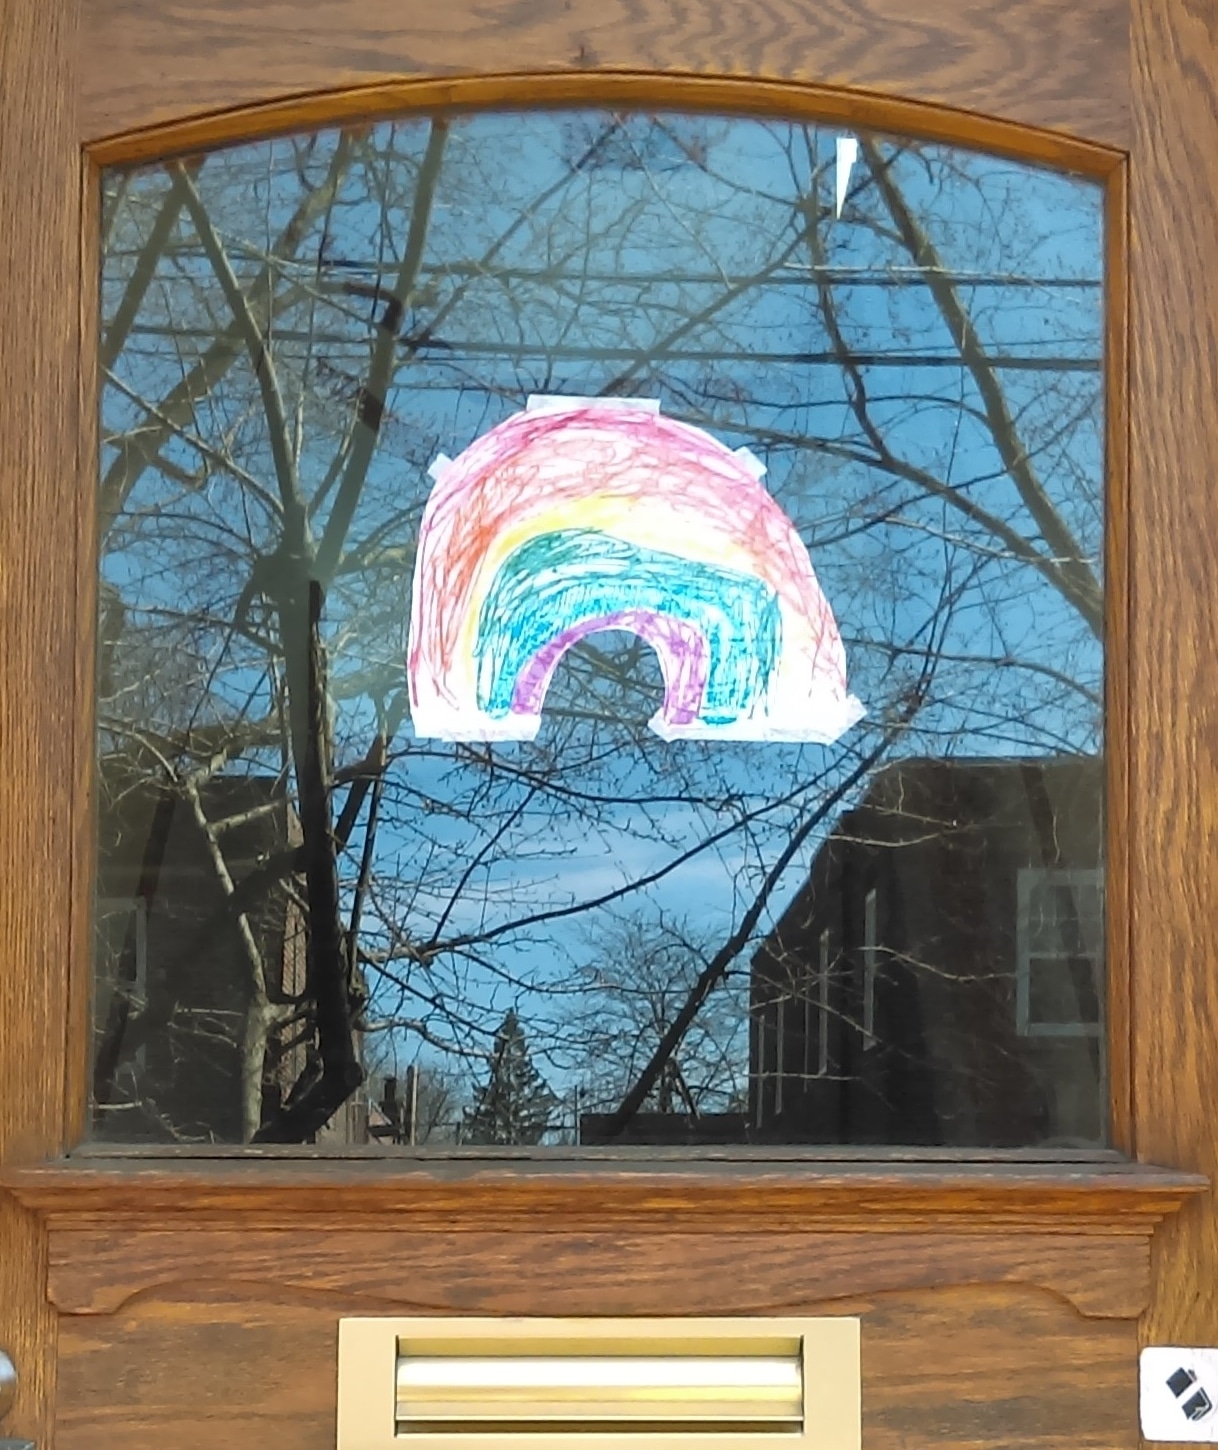 a wooden door with a window. on the window is taped a rainbow drawn in crayon